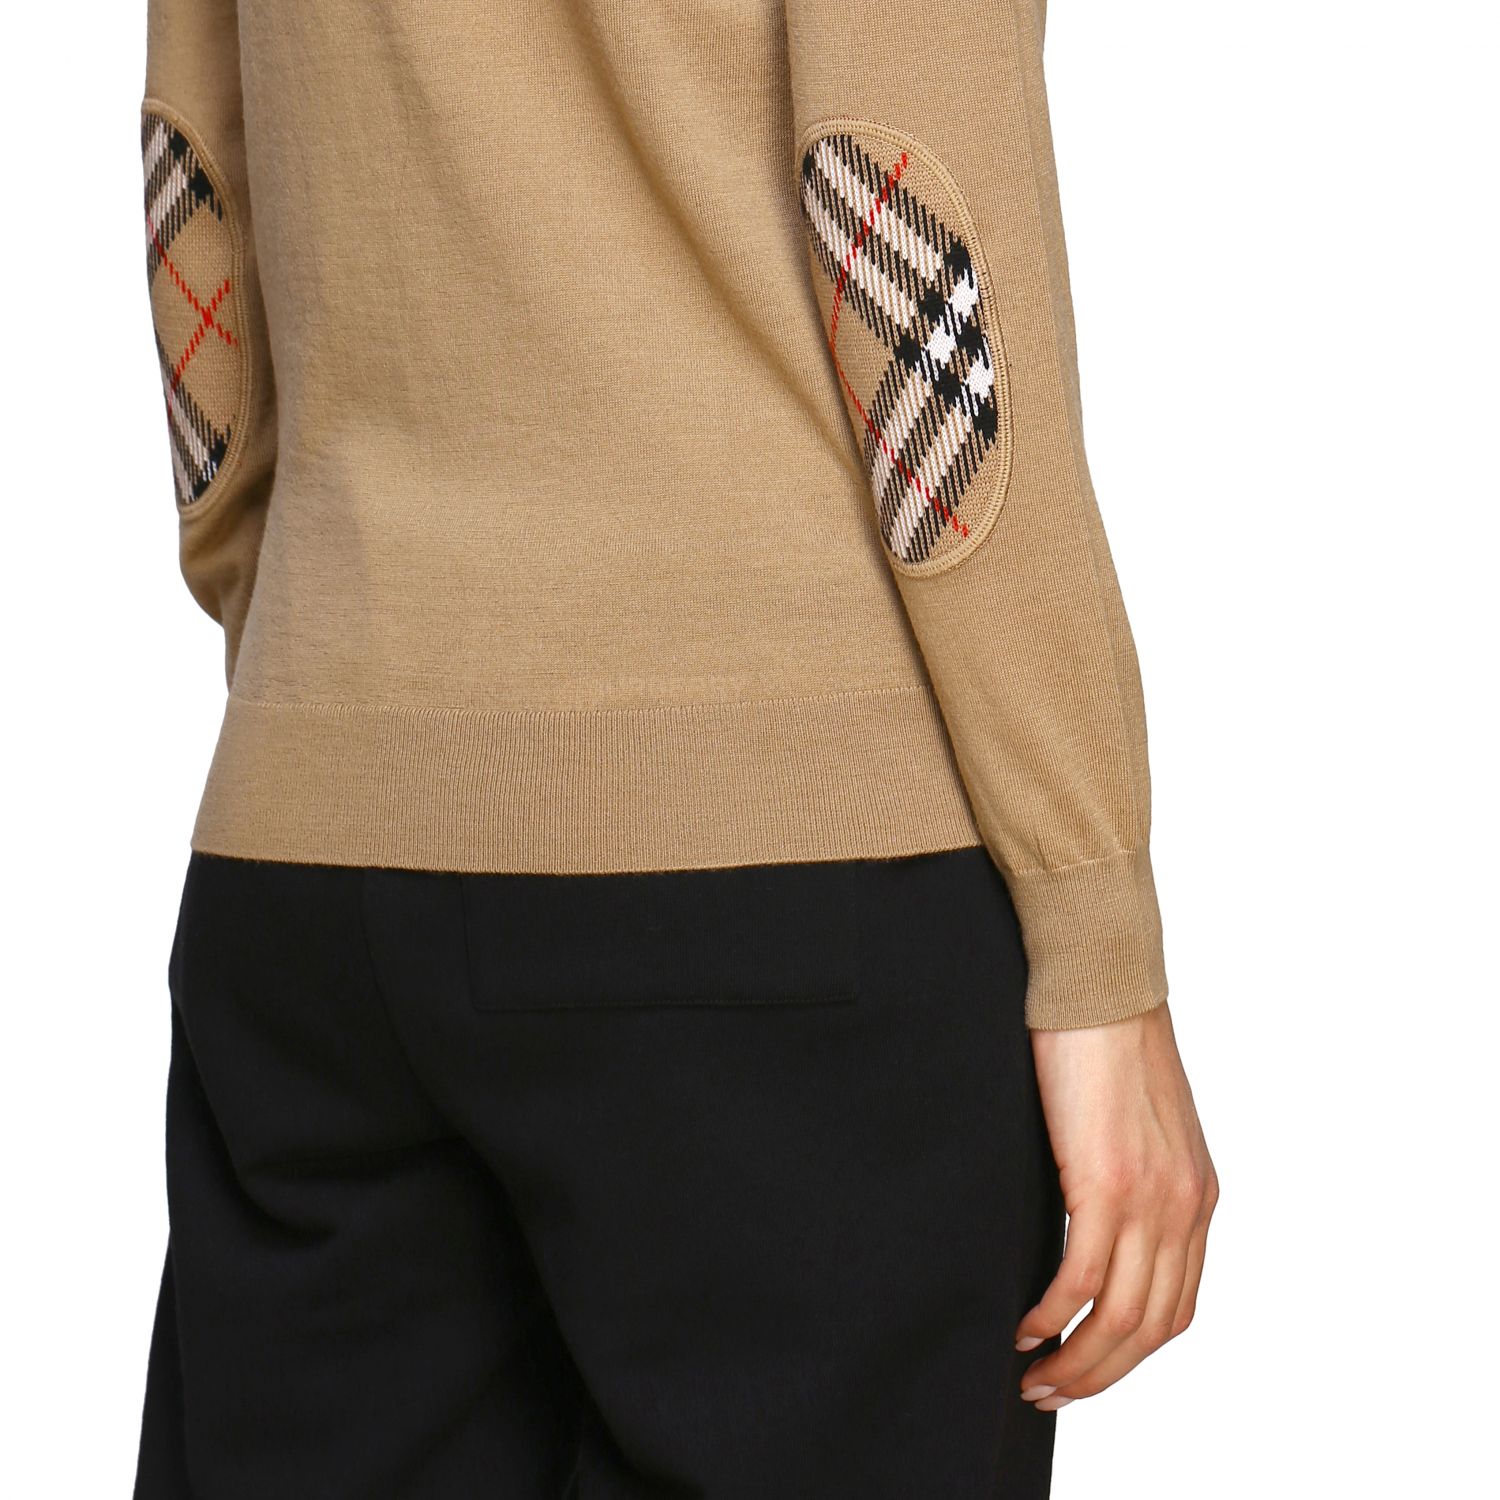 Burberry Womens Sweater in Beige - Save 20% Brown Womens Jumpers and knitwear Burberry Jumpers and knitwear 